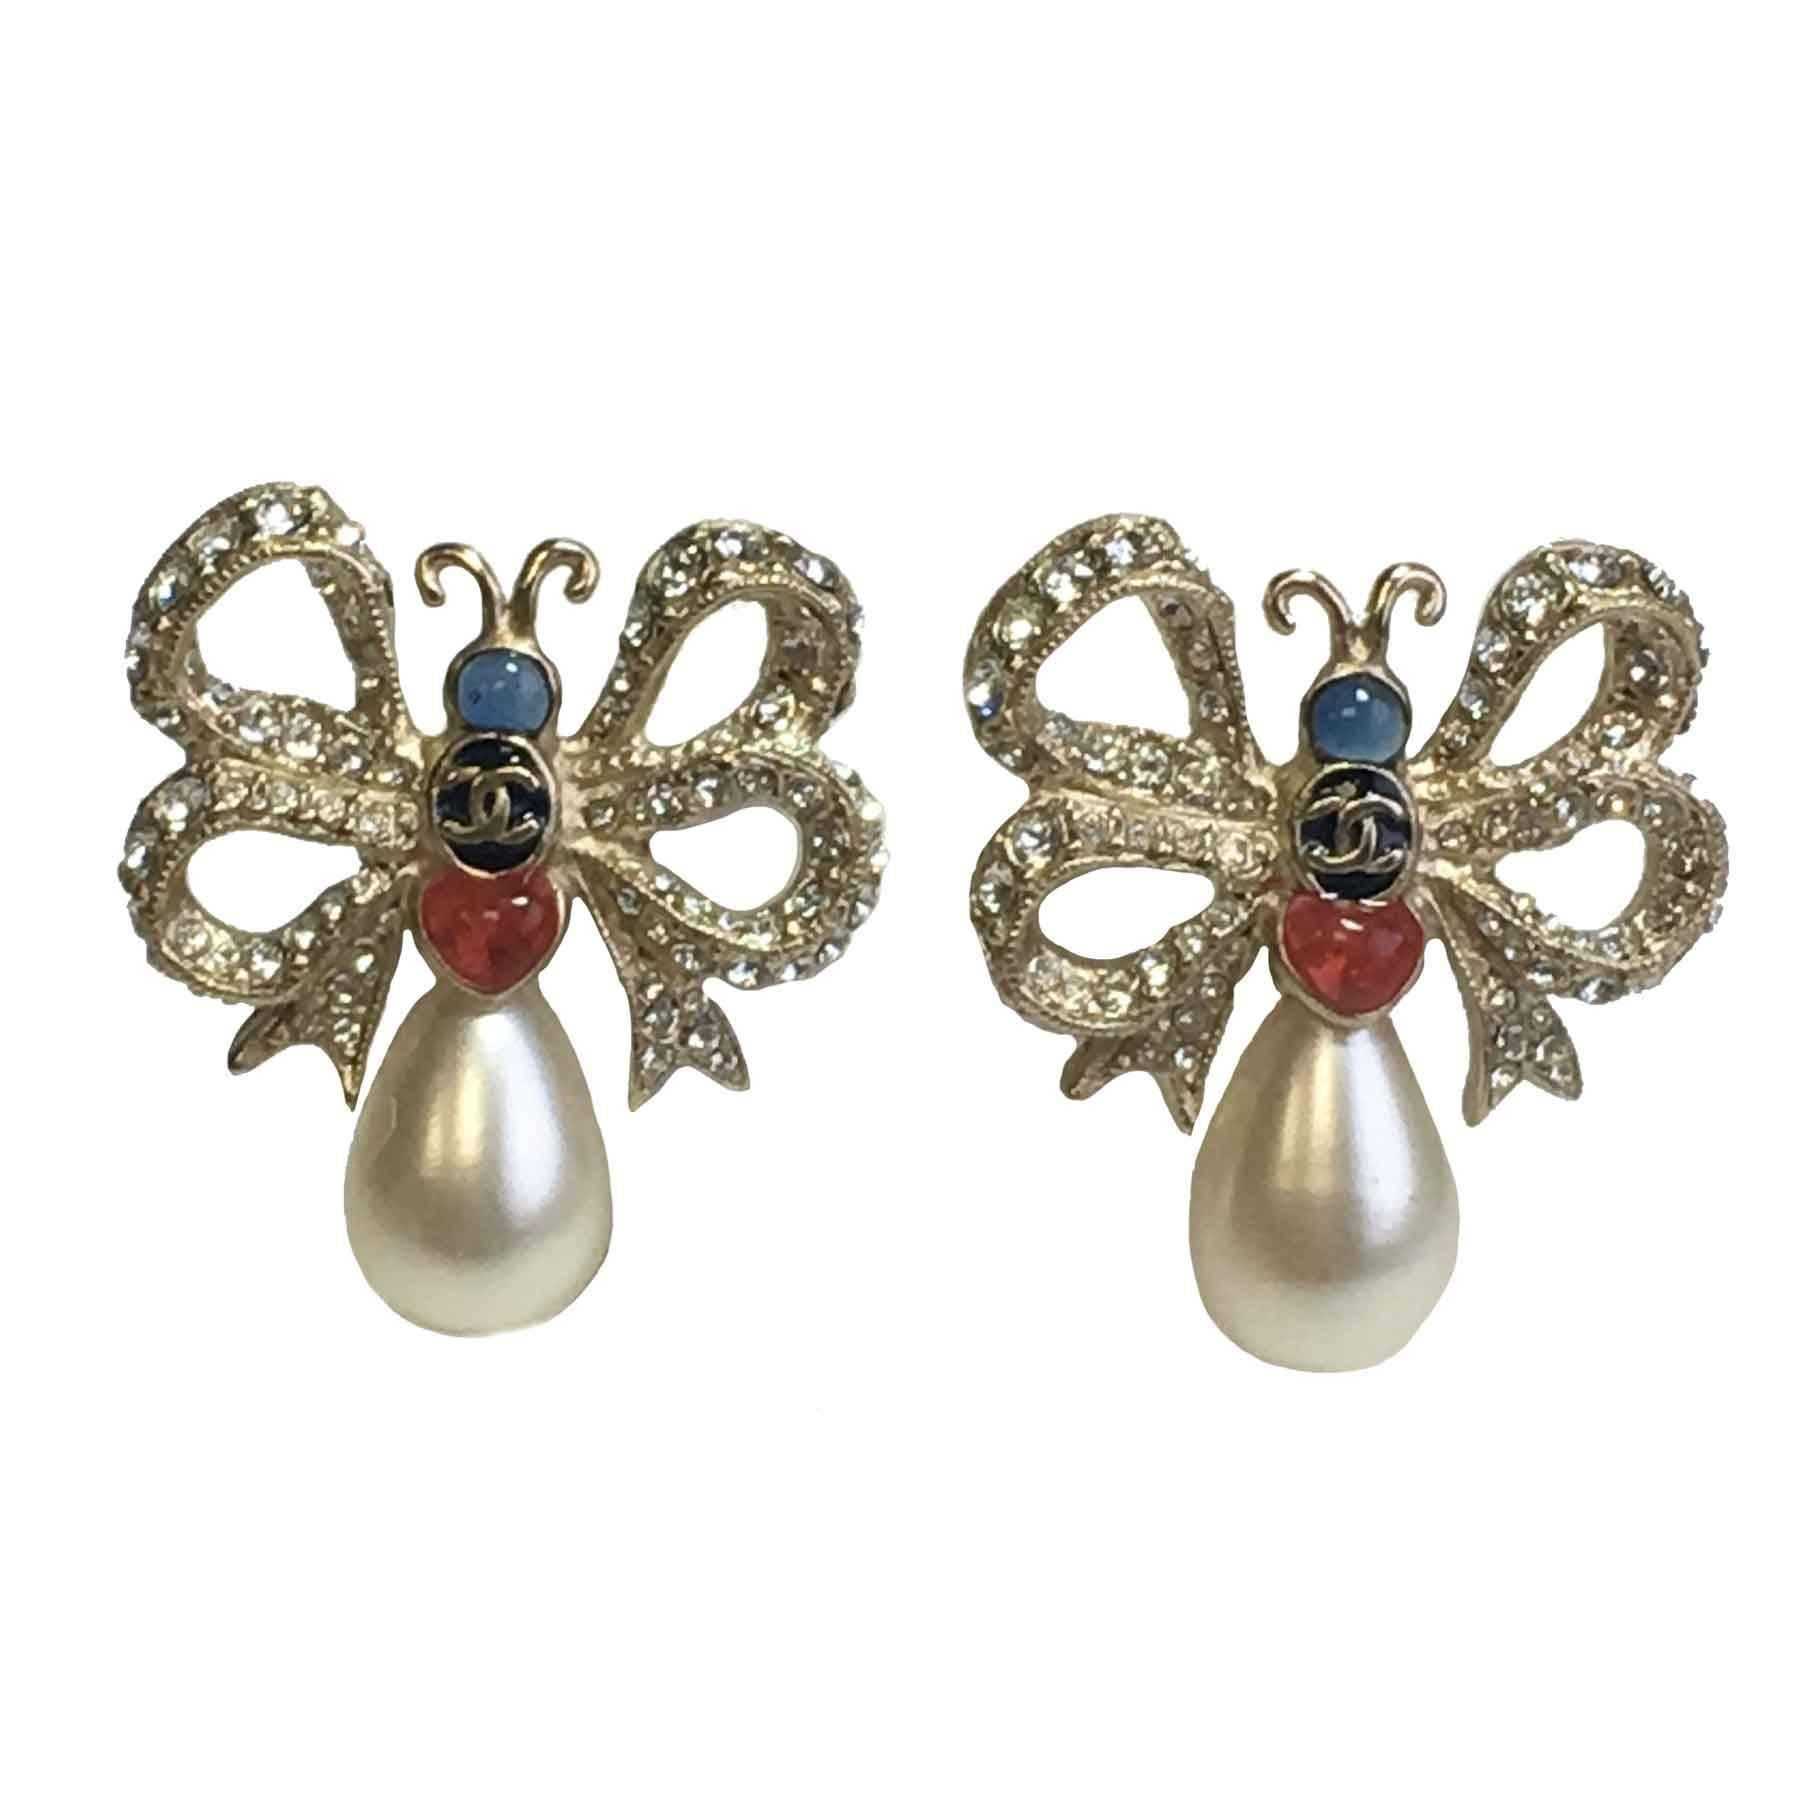 Chanel Butterfly Ear Studs AW2016/17 in Gilt Metal, Glass Pearl and Rhinestones